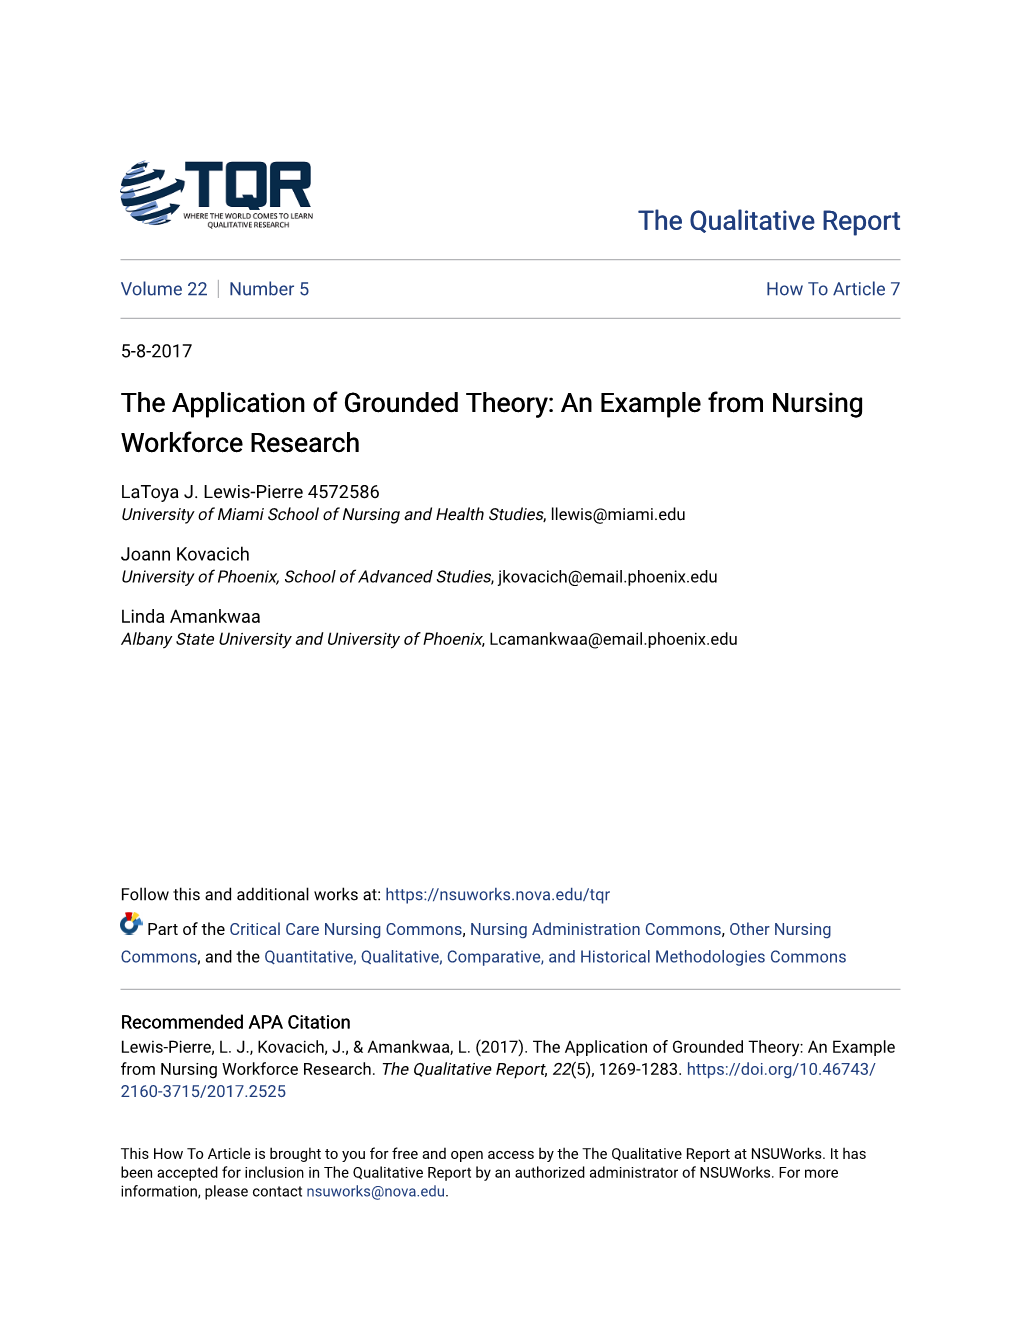 The Application of Grounded Theory: an Example from Nursing Workforce Research